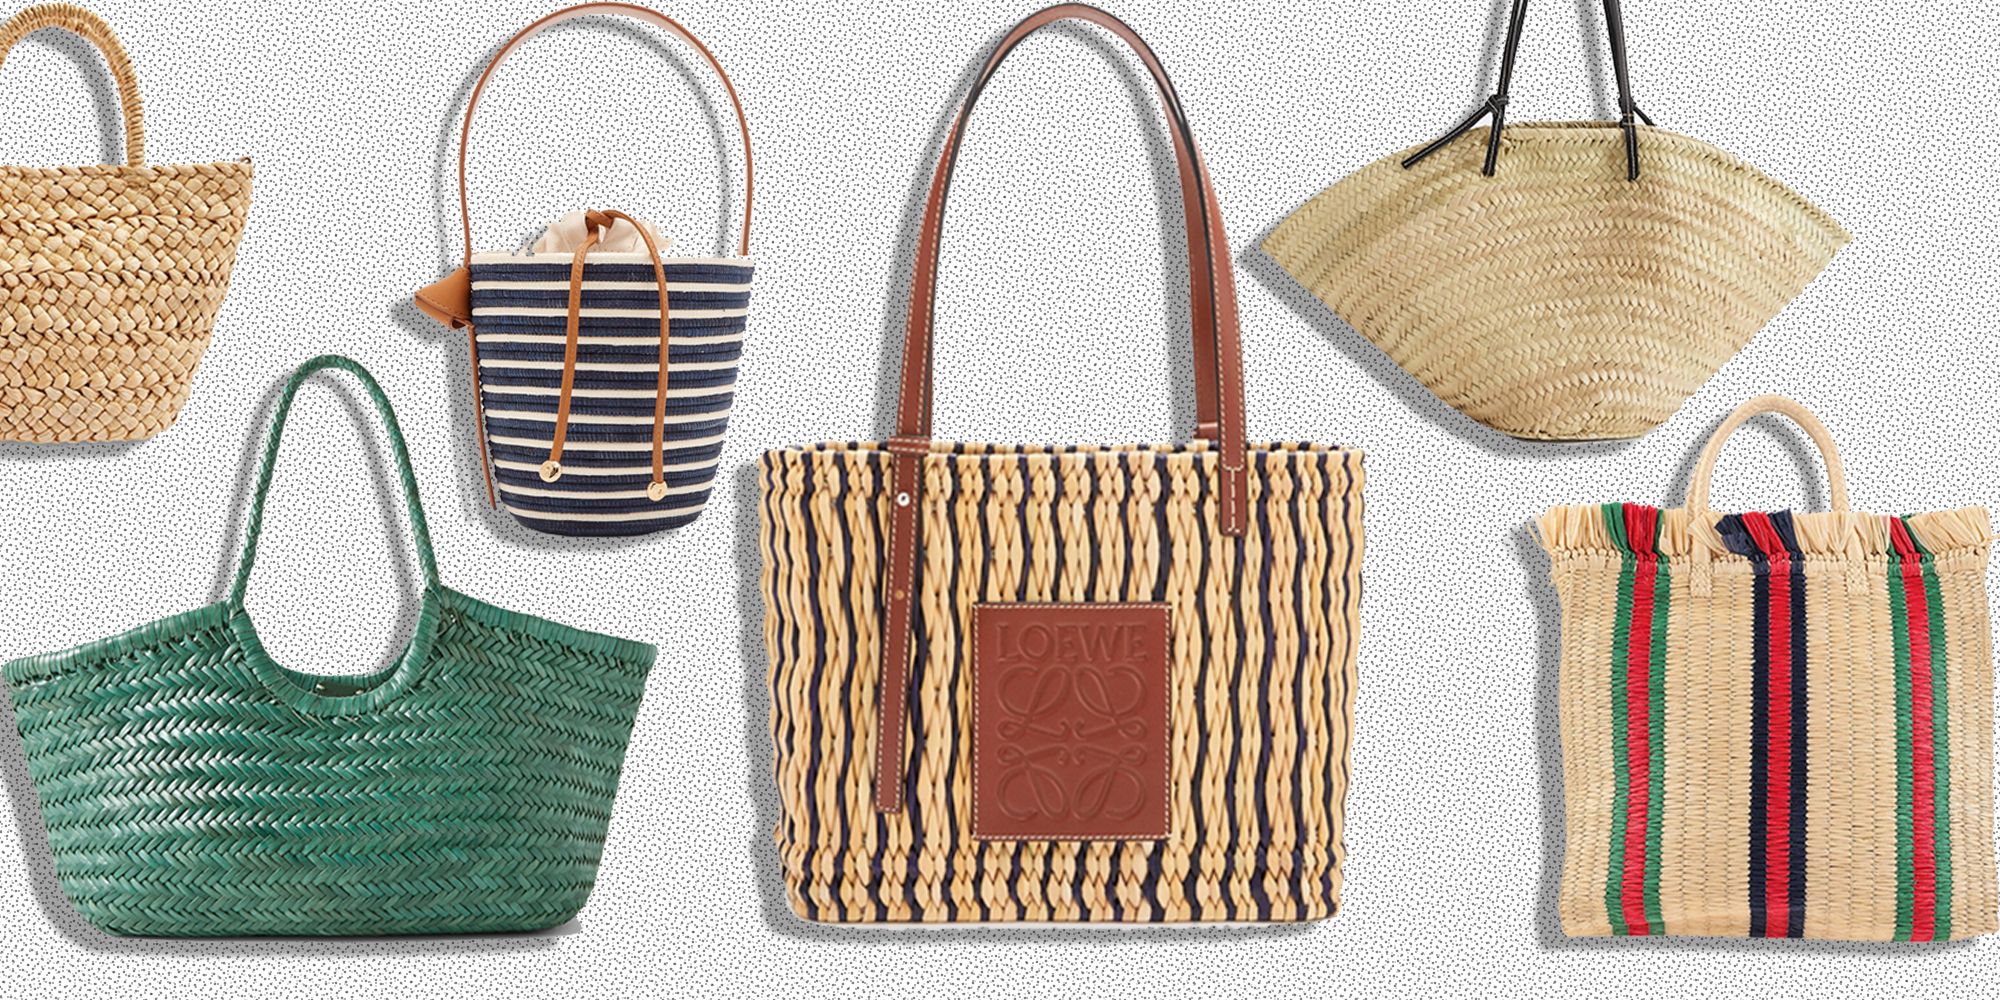 12 Of The Best Basket Bags To Buy Now